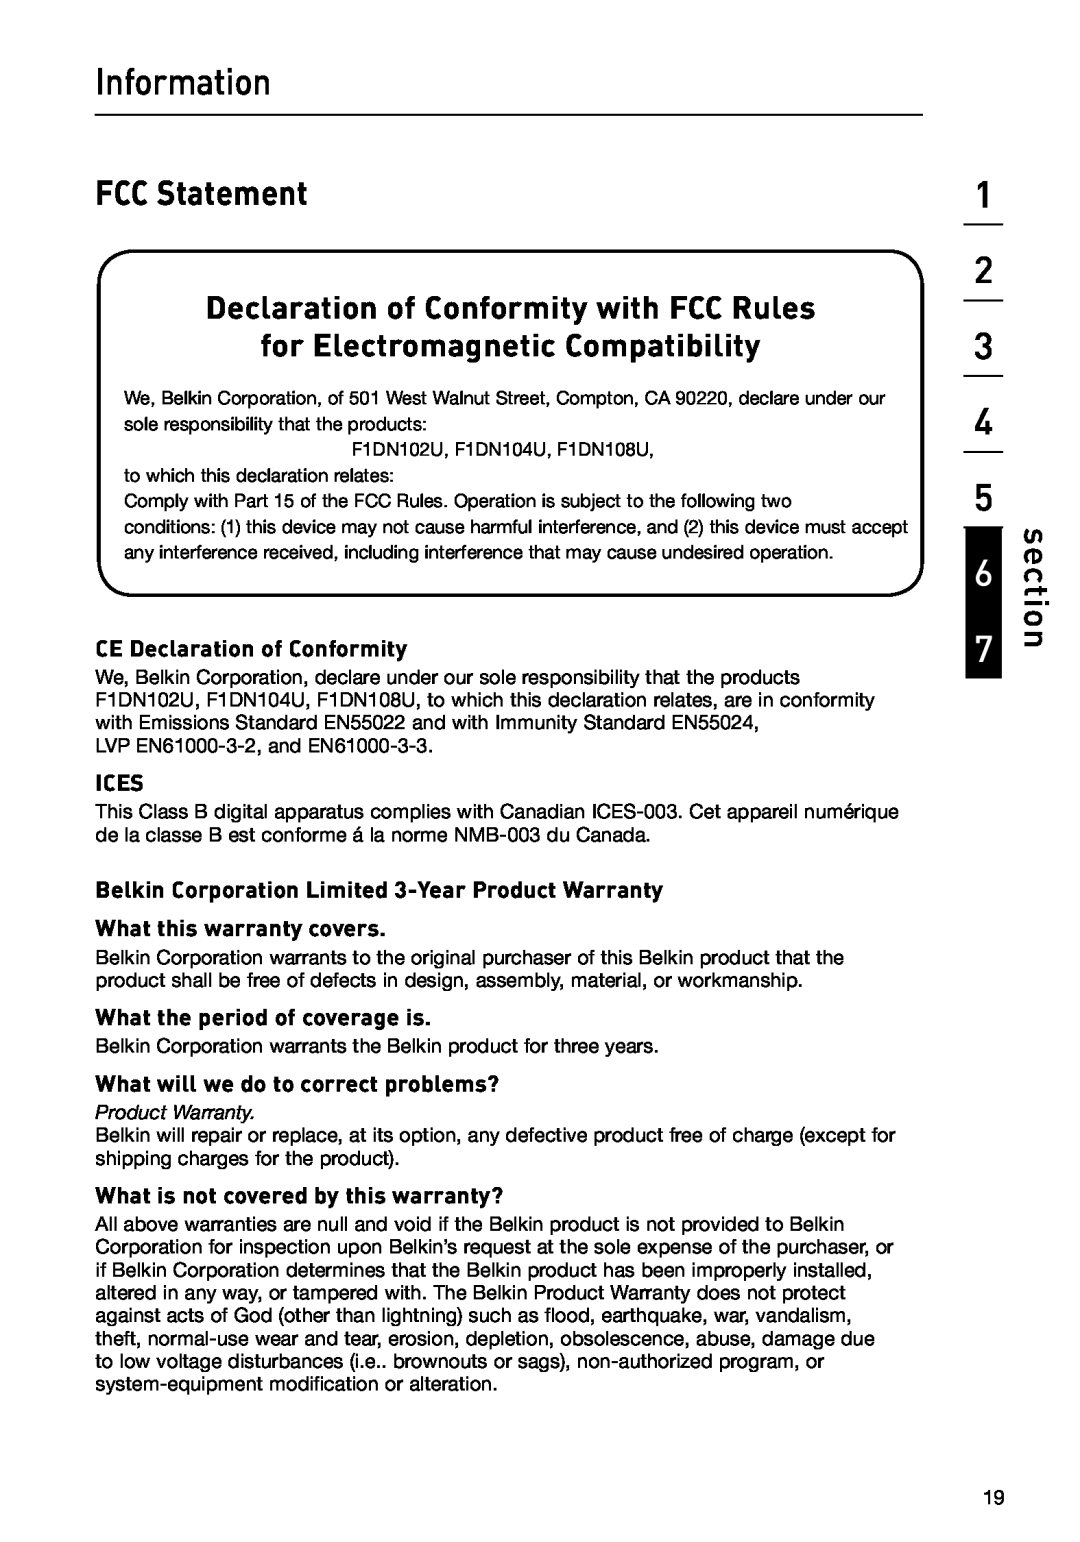 Belkin P75209 Information, FCC Statement, Declaration of Conformity with FCC Rules, for Electromagnetic Compatibility 